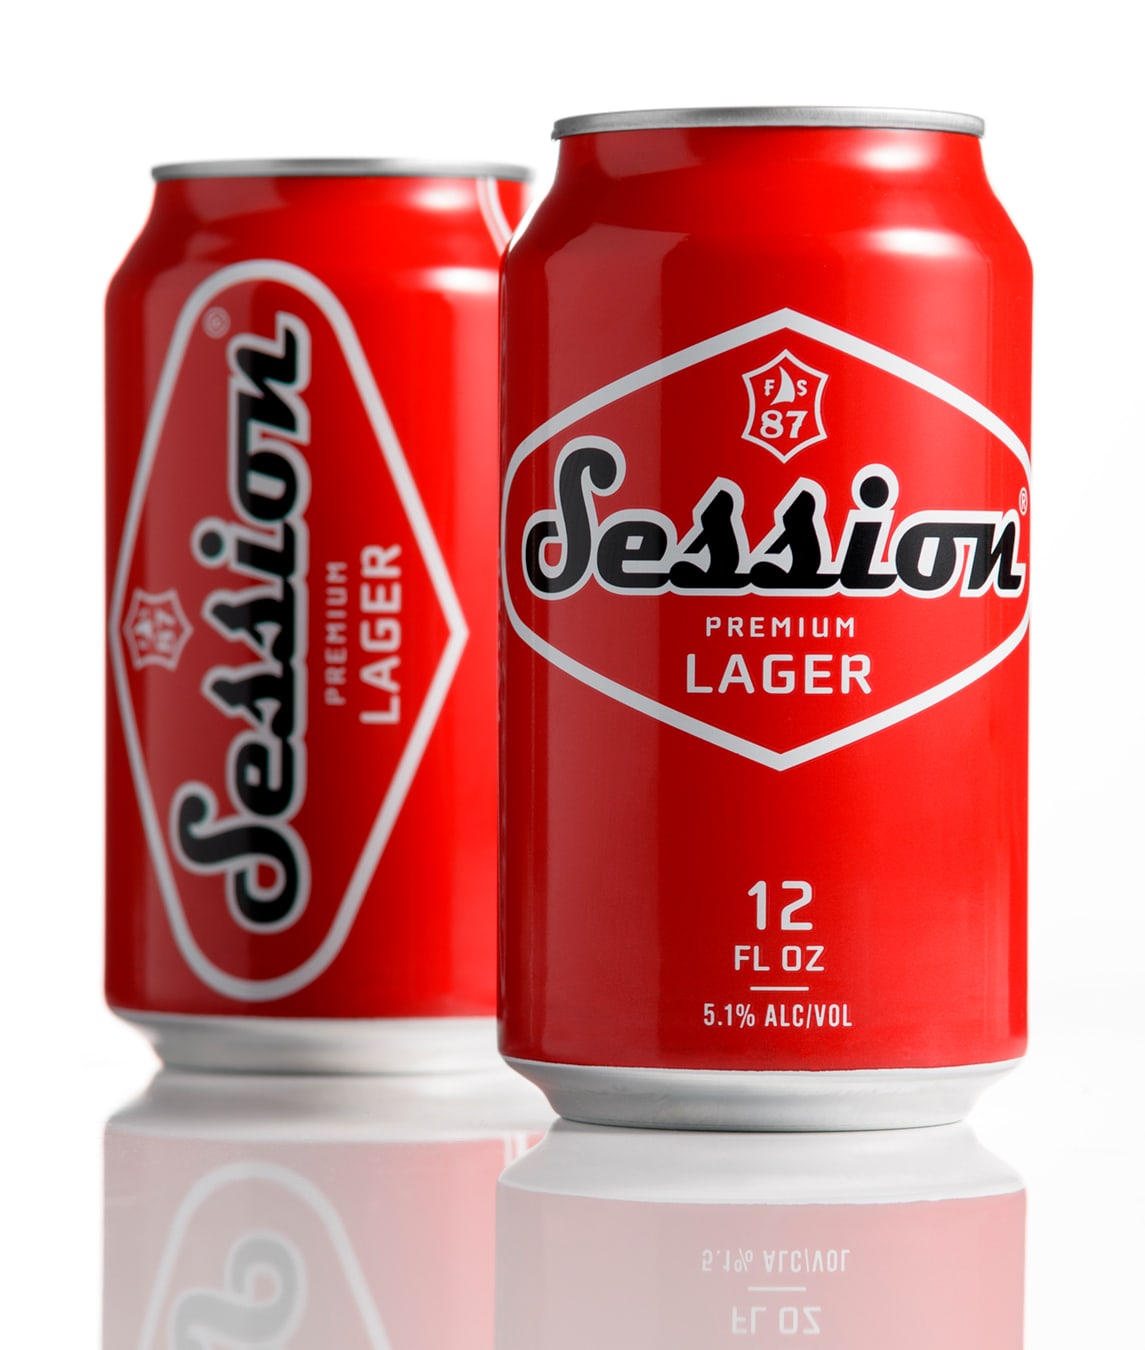 Session lager beer can design